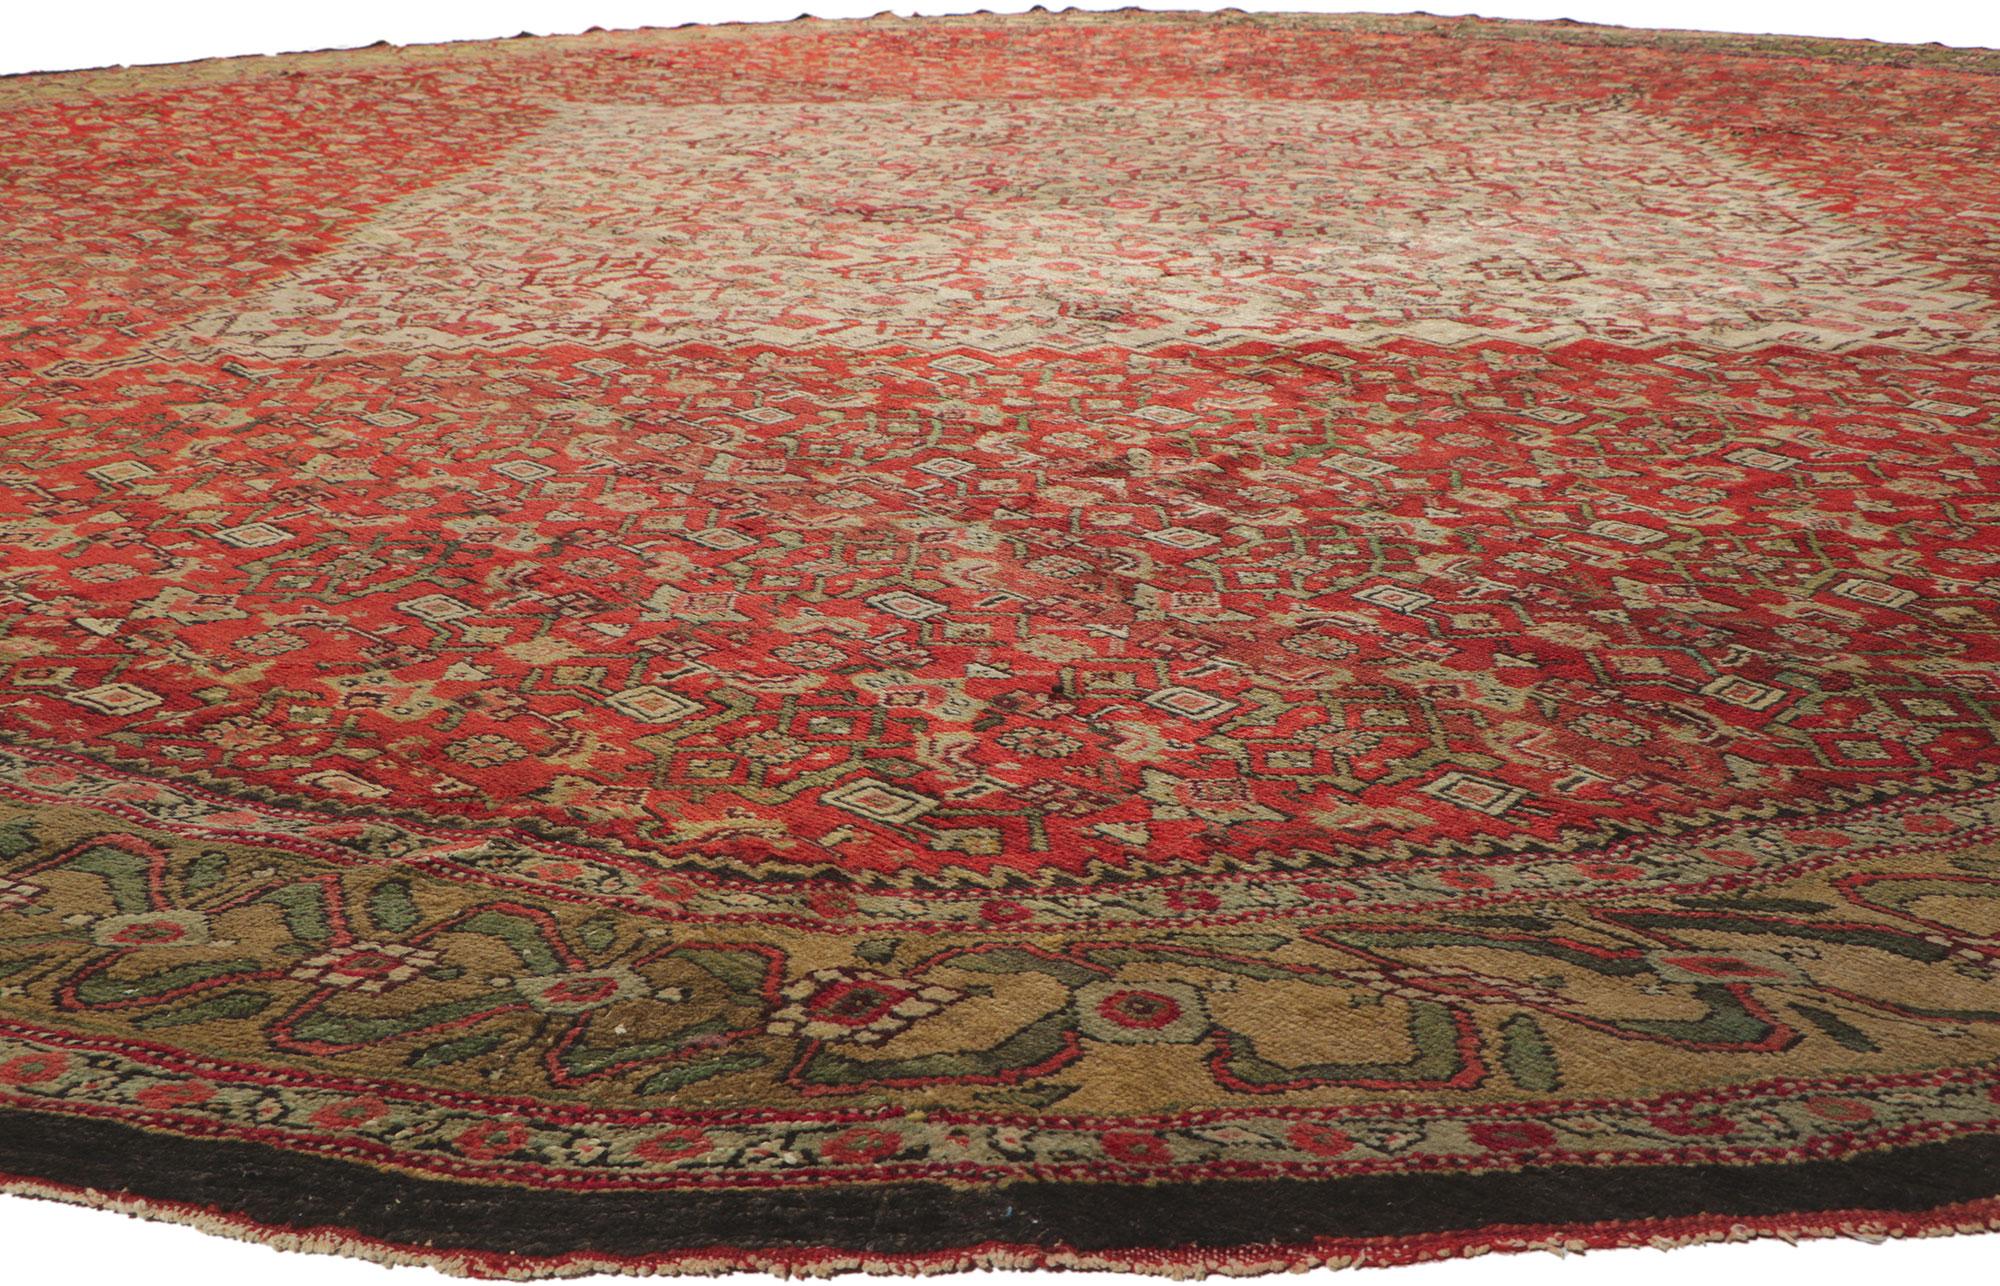 53828 Oversized Antique Persian Sultanabad Rug 17'00 x 17'01. With its effortless beauty and timeless appeal, this hand knotted wool antique Persian Sultanabad rug can beautifully blend modern, contemporary, and traditional interiors. Taking center